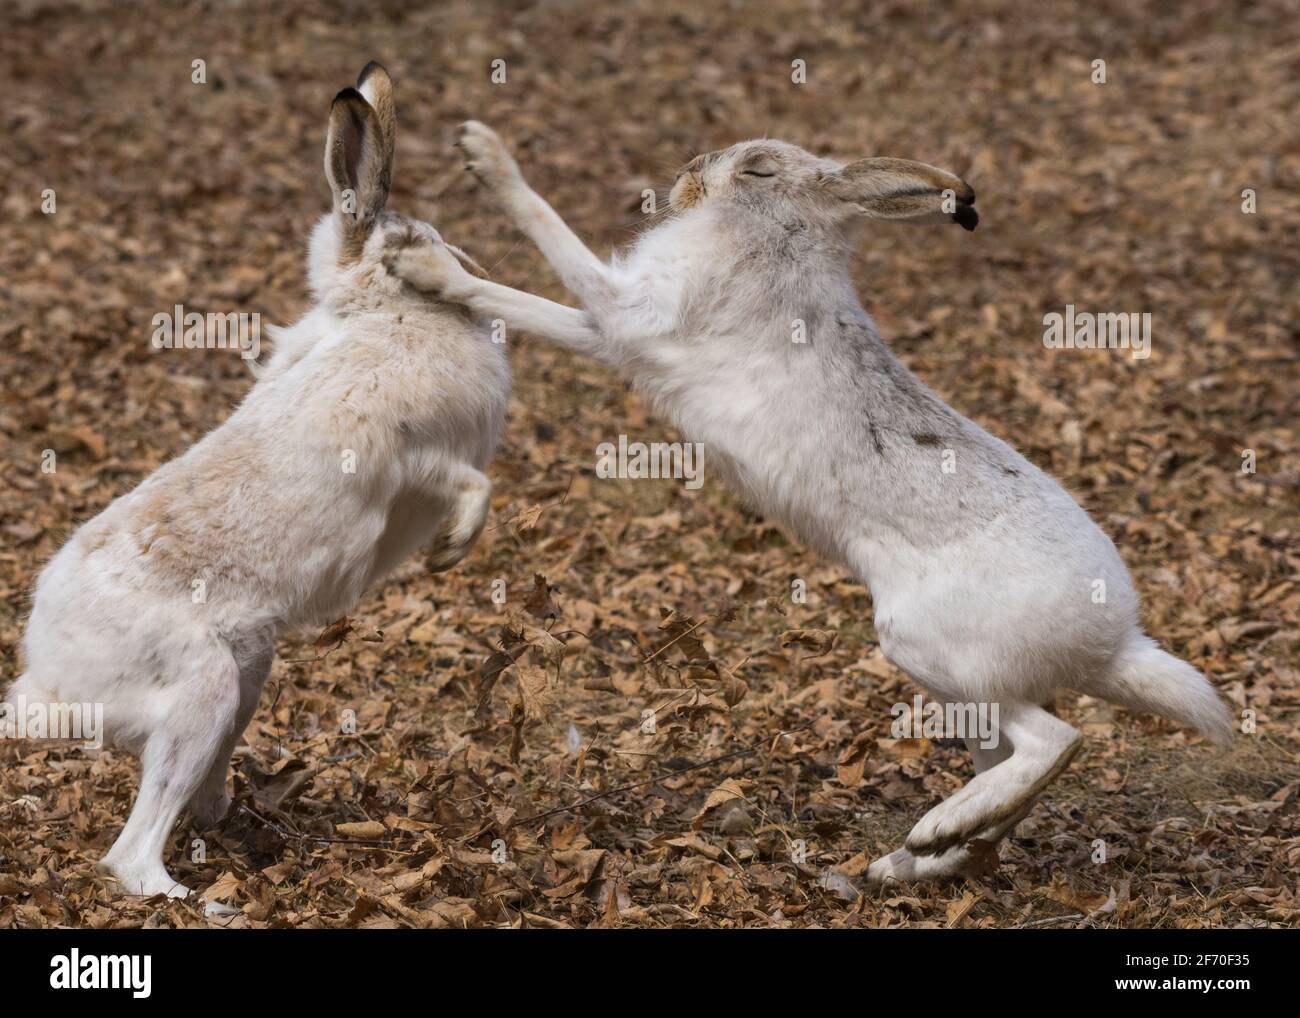 White-tailed Jackrabbits (Lepus townsendii) sparring during mating season in spring camouflage, Alberta, Canada Stock Photo